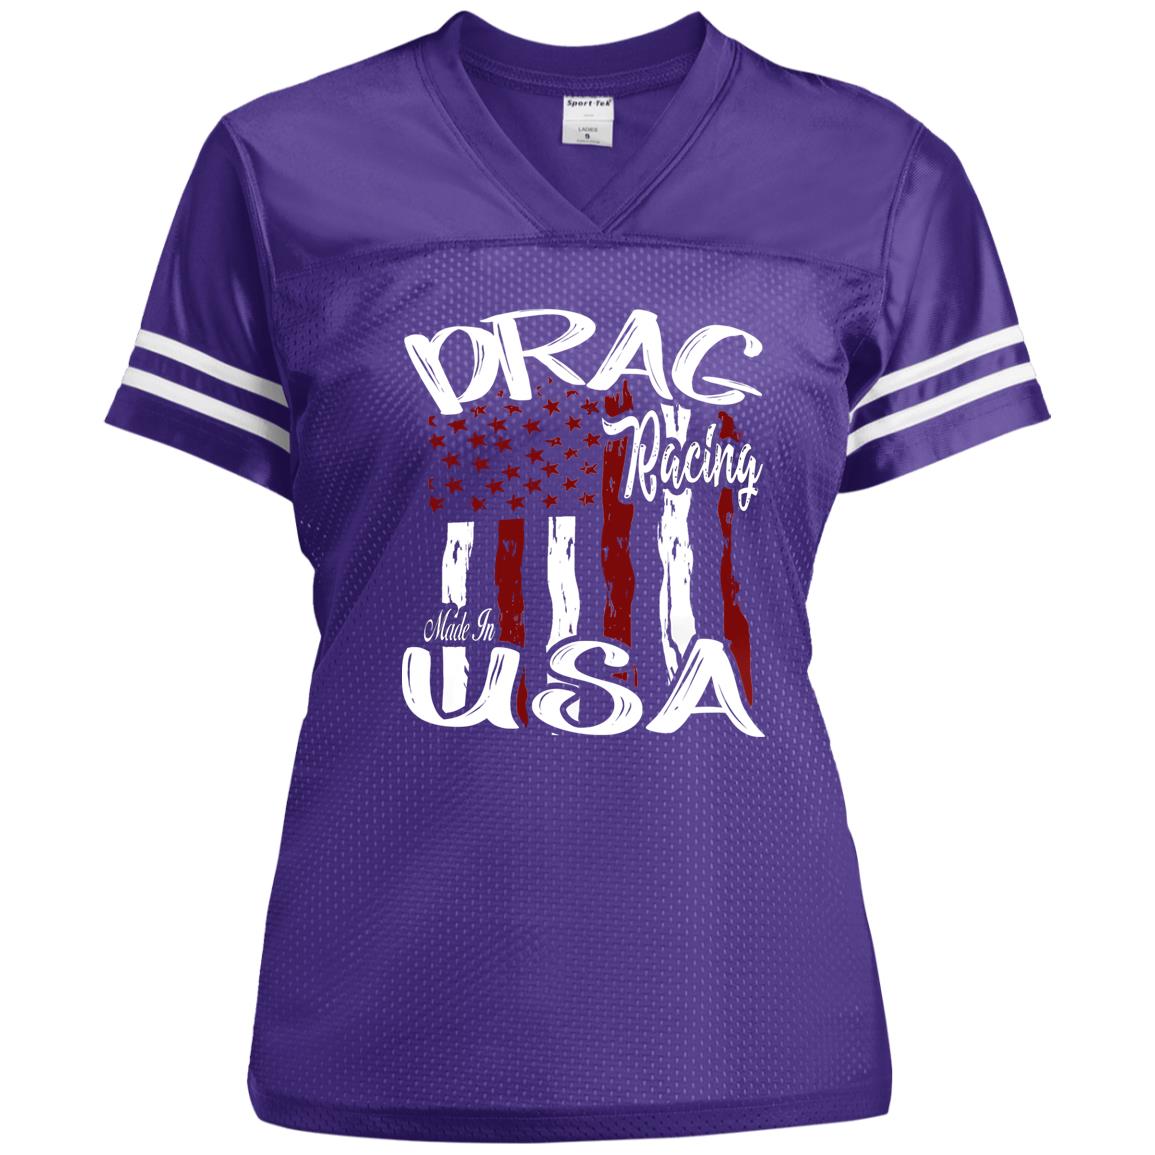 Drag Racing Made In USA Ladies' Replica Jersey